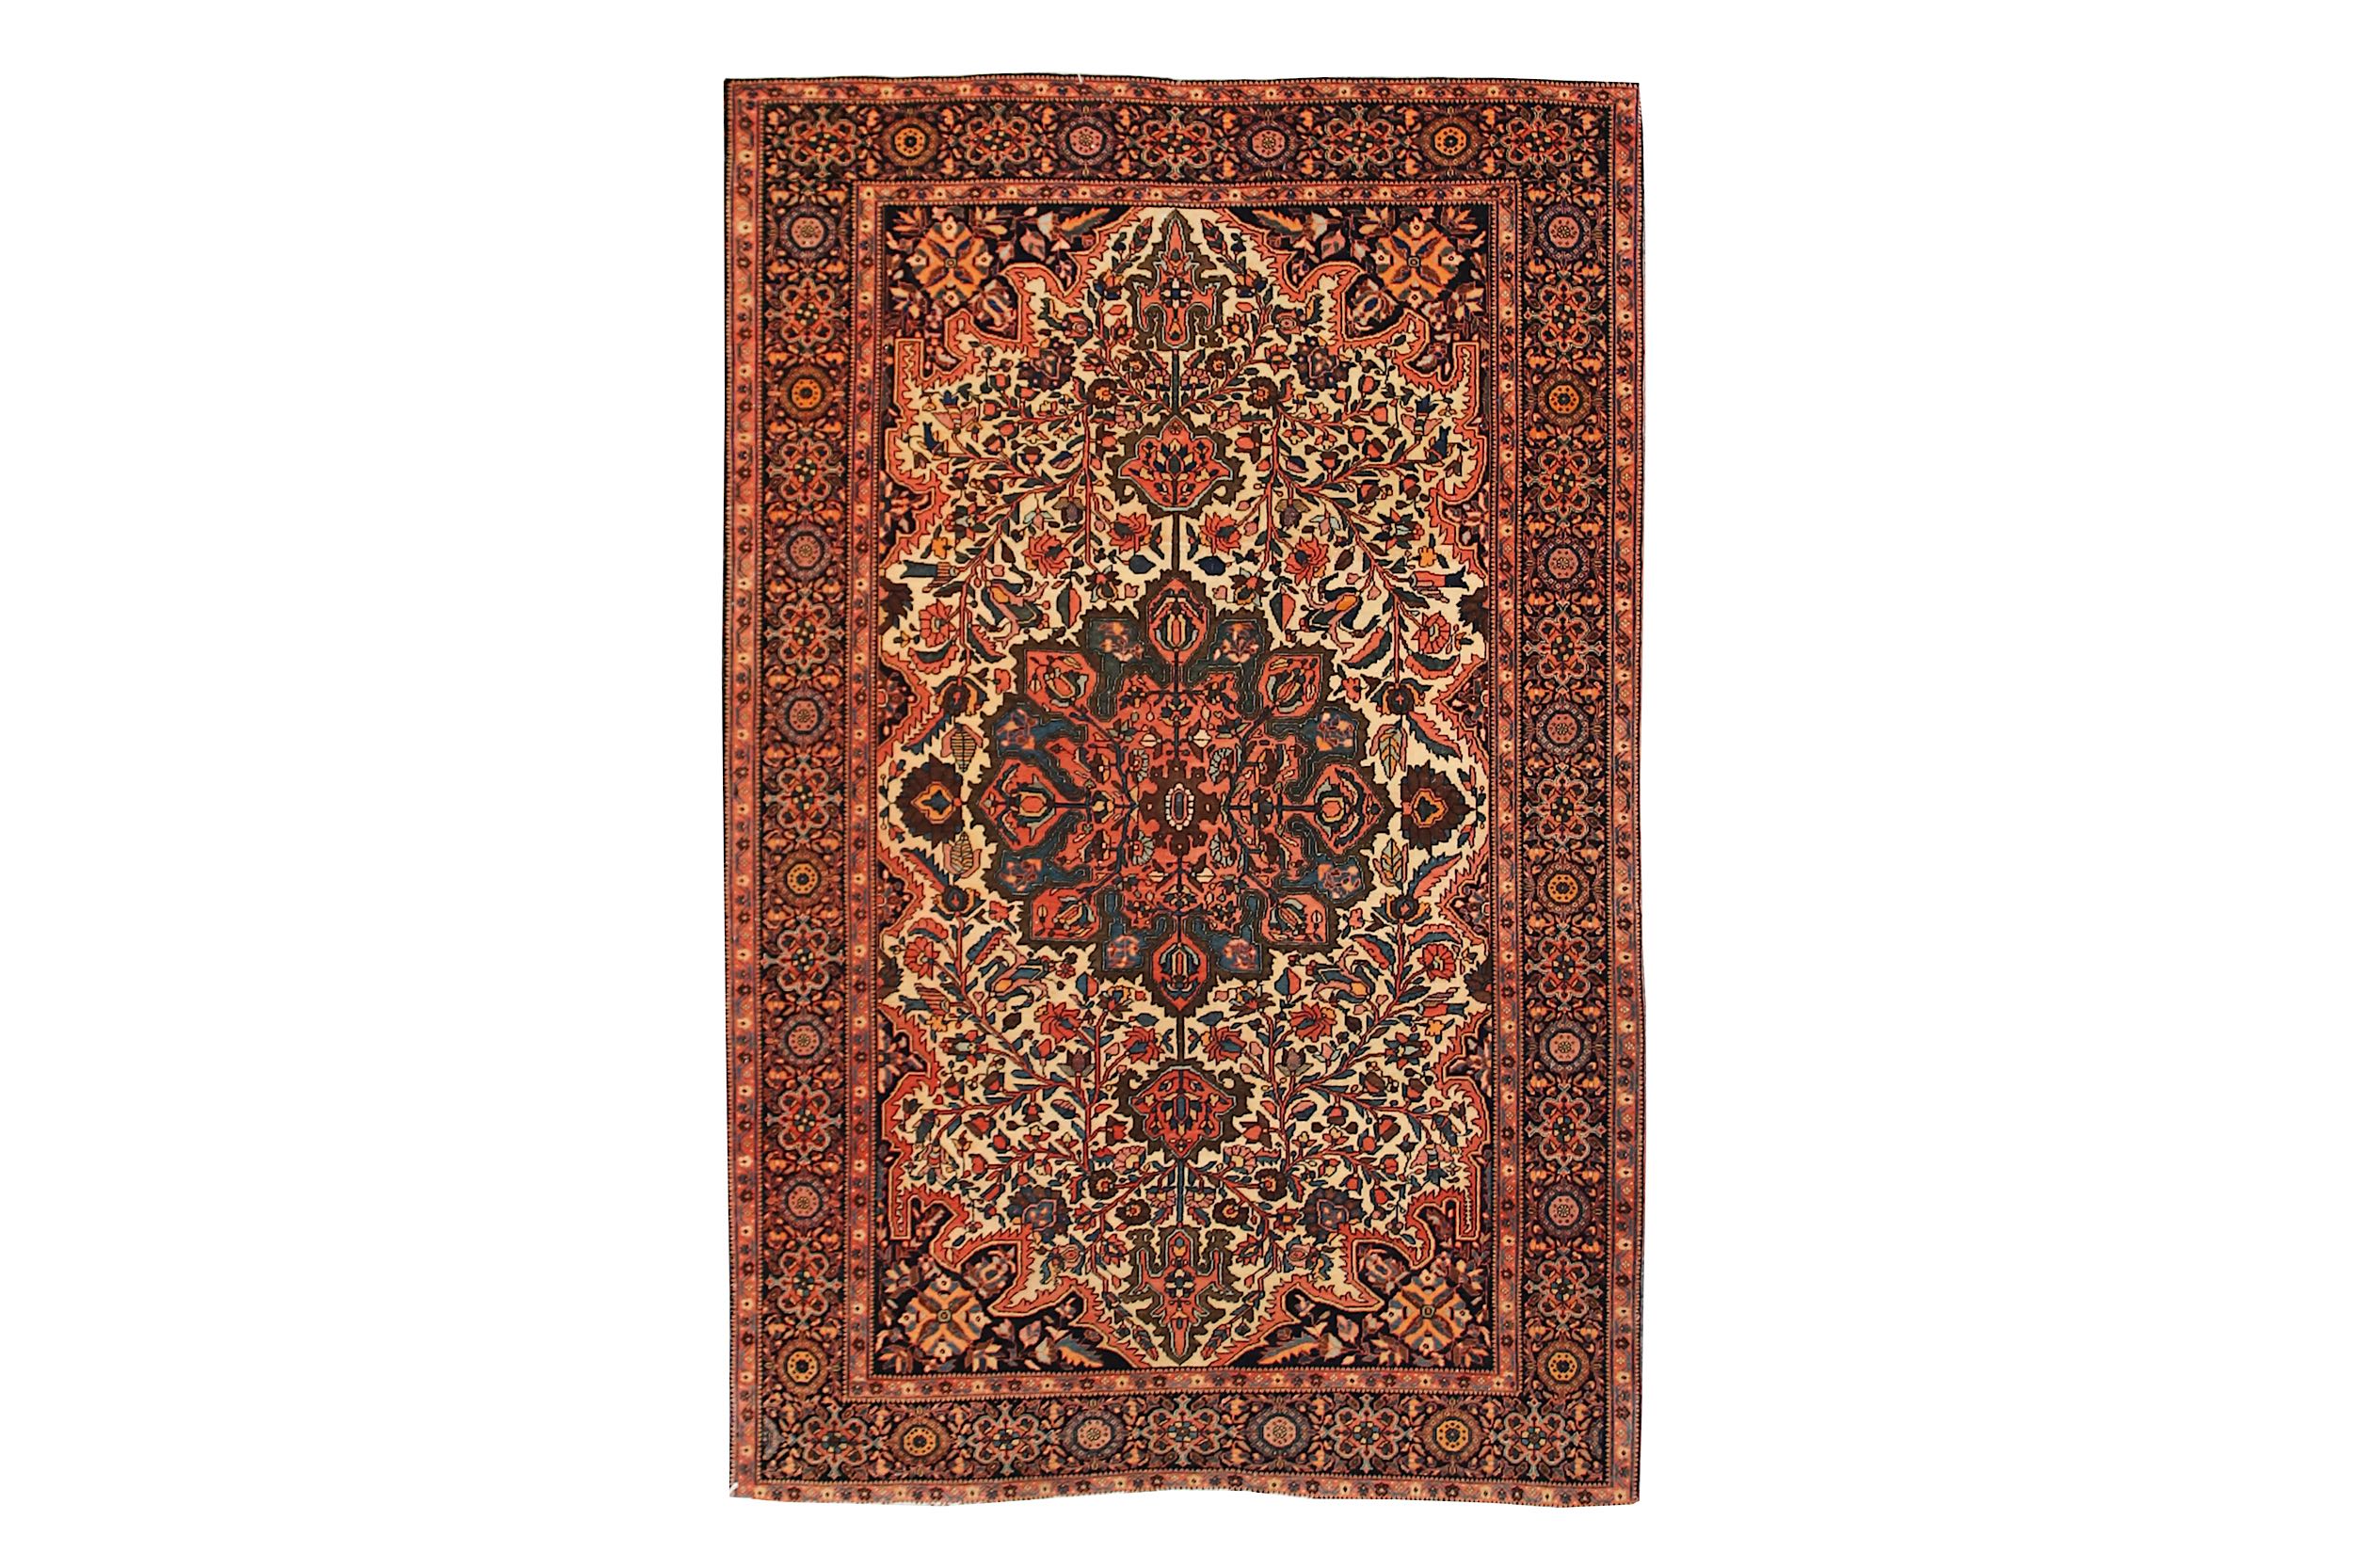 A FINE ANTIQUE SAROUK-FERAGHAN RUG, WEST PERSIA approx: 6ft.7in. x 4ft.2in.(201cm. x 127cm.) Very